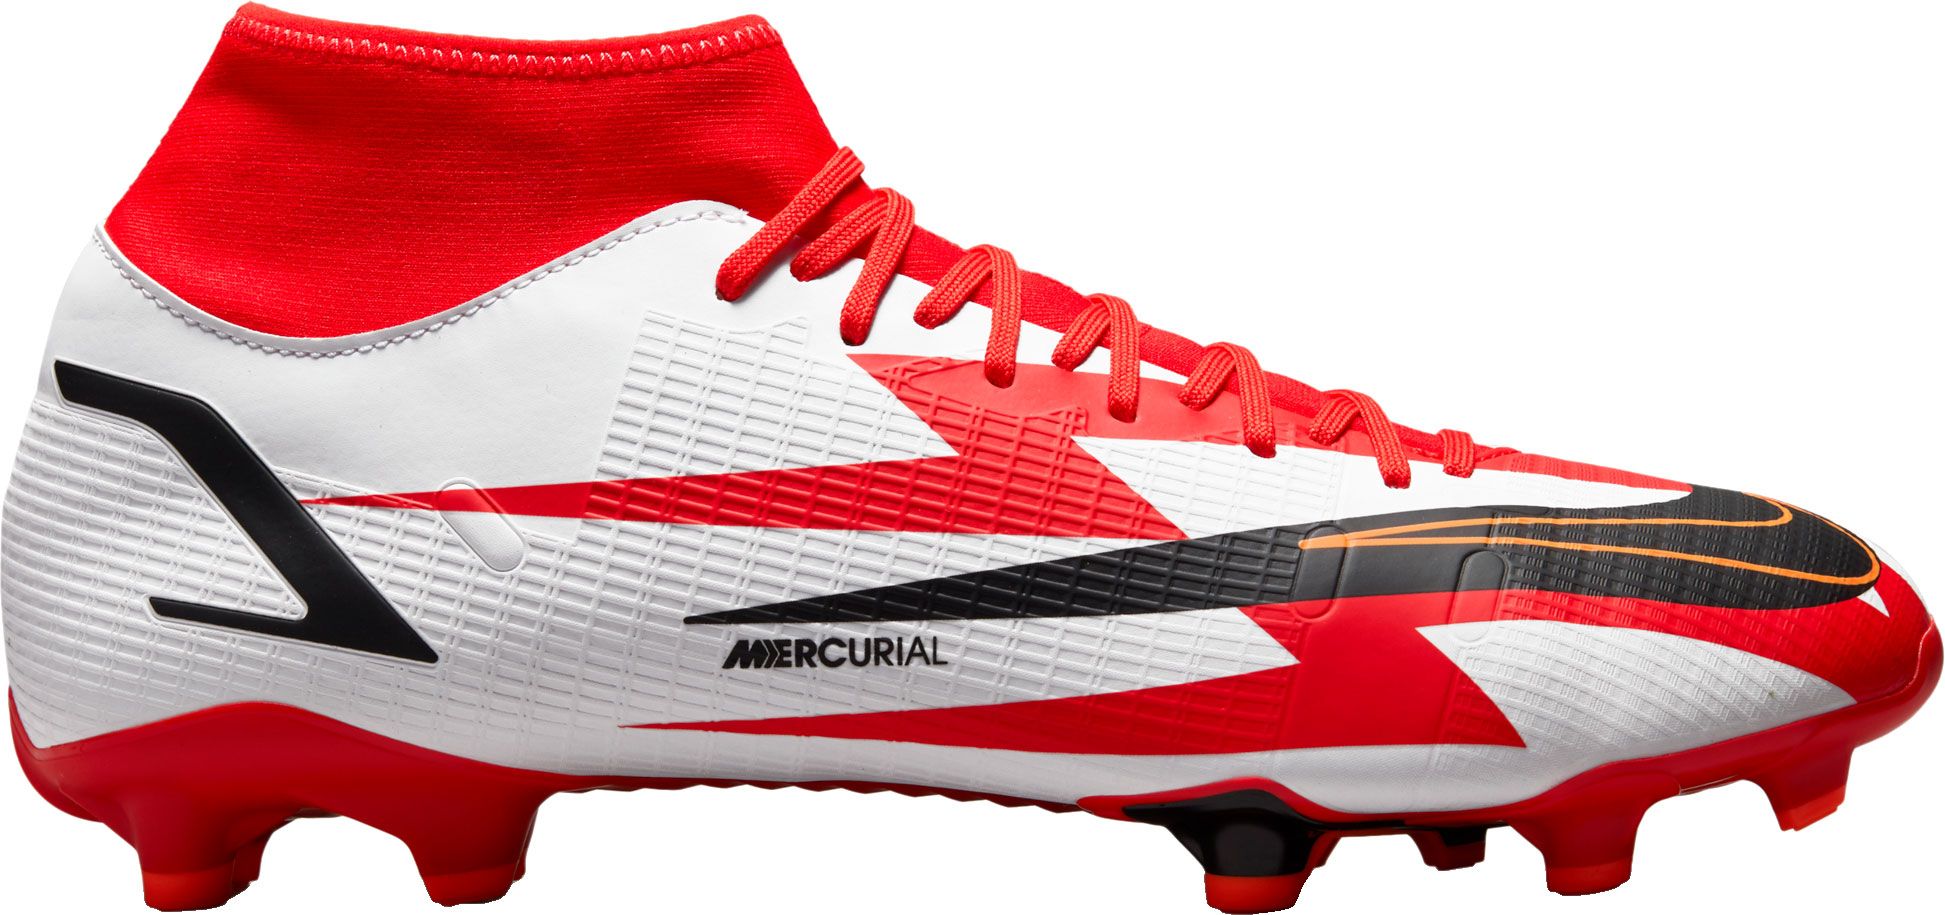 Nike Mercurial Superfly 8 Academy CR7 FG Soccer Cleats, Men's, Red